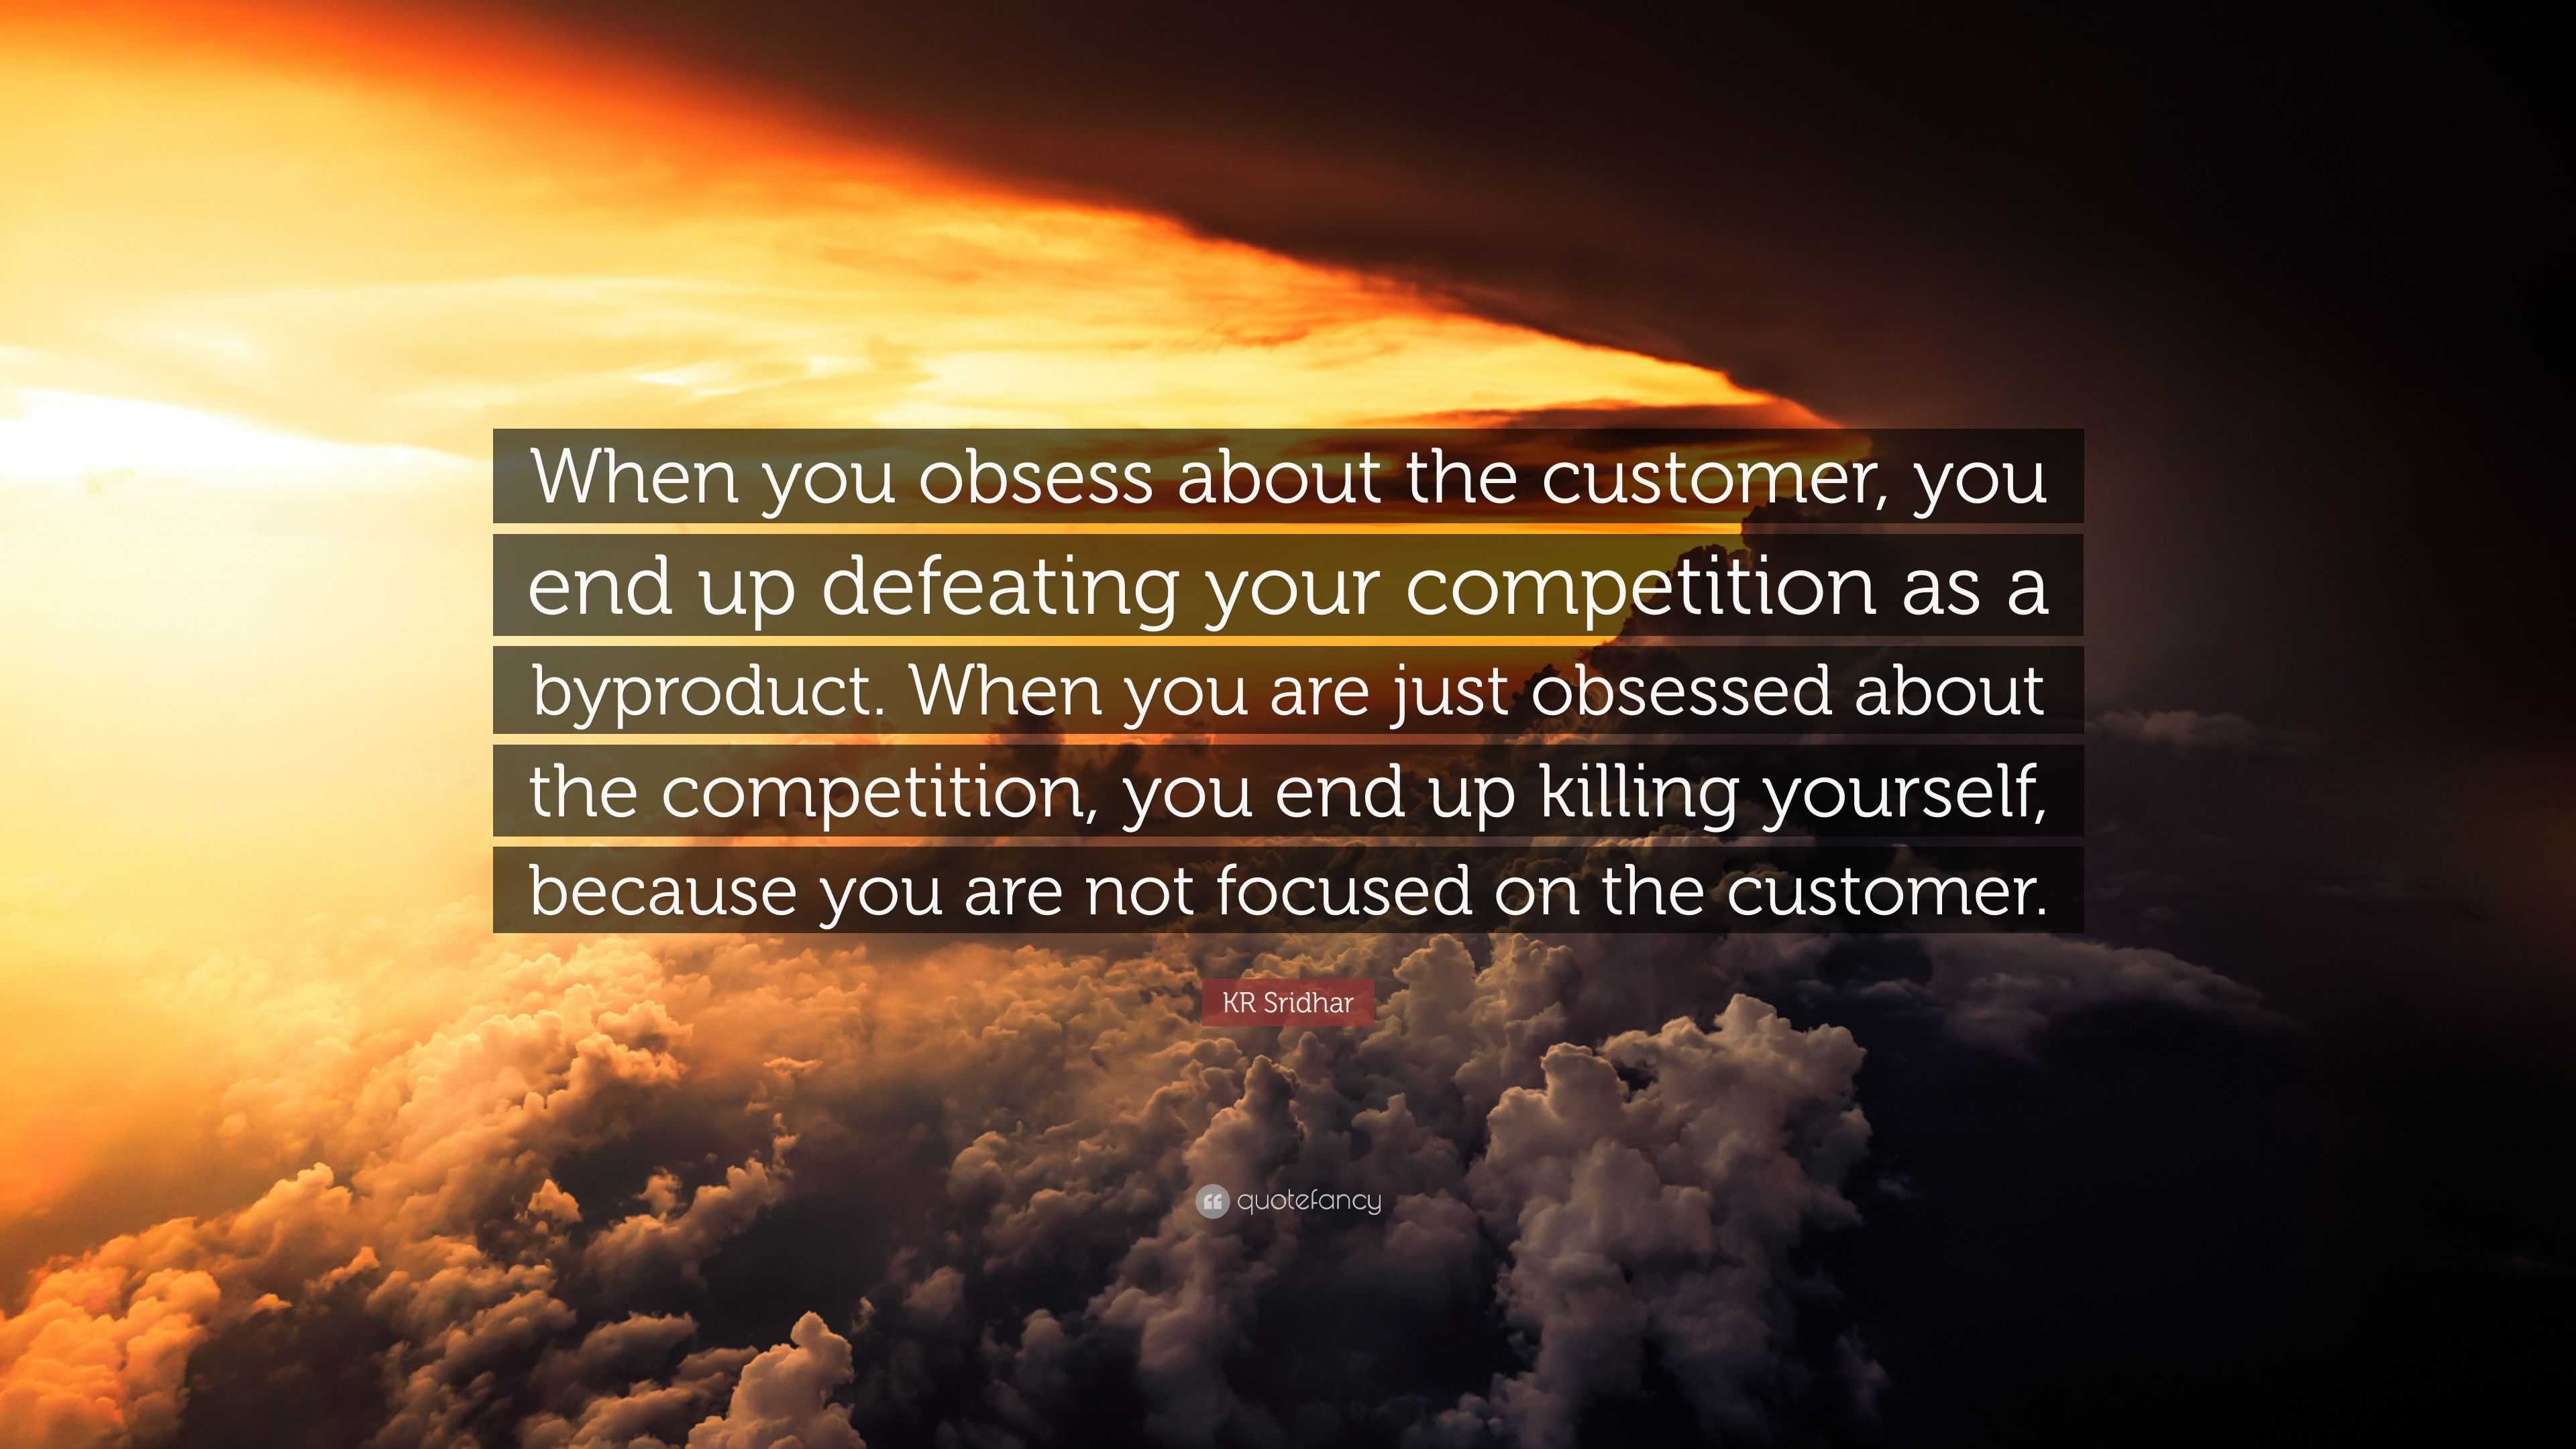 Kr Sridhar Quote “when You Obsess About The Customer You End Up